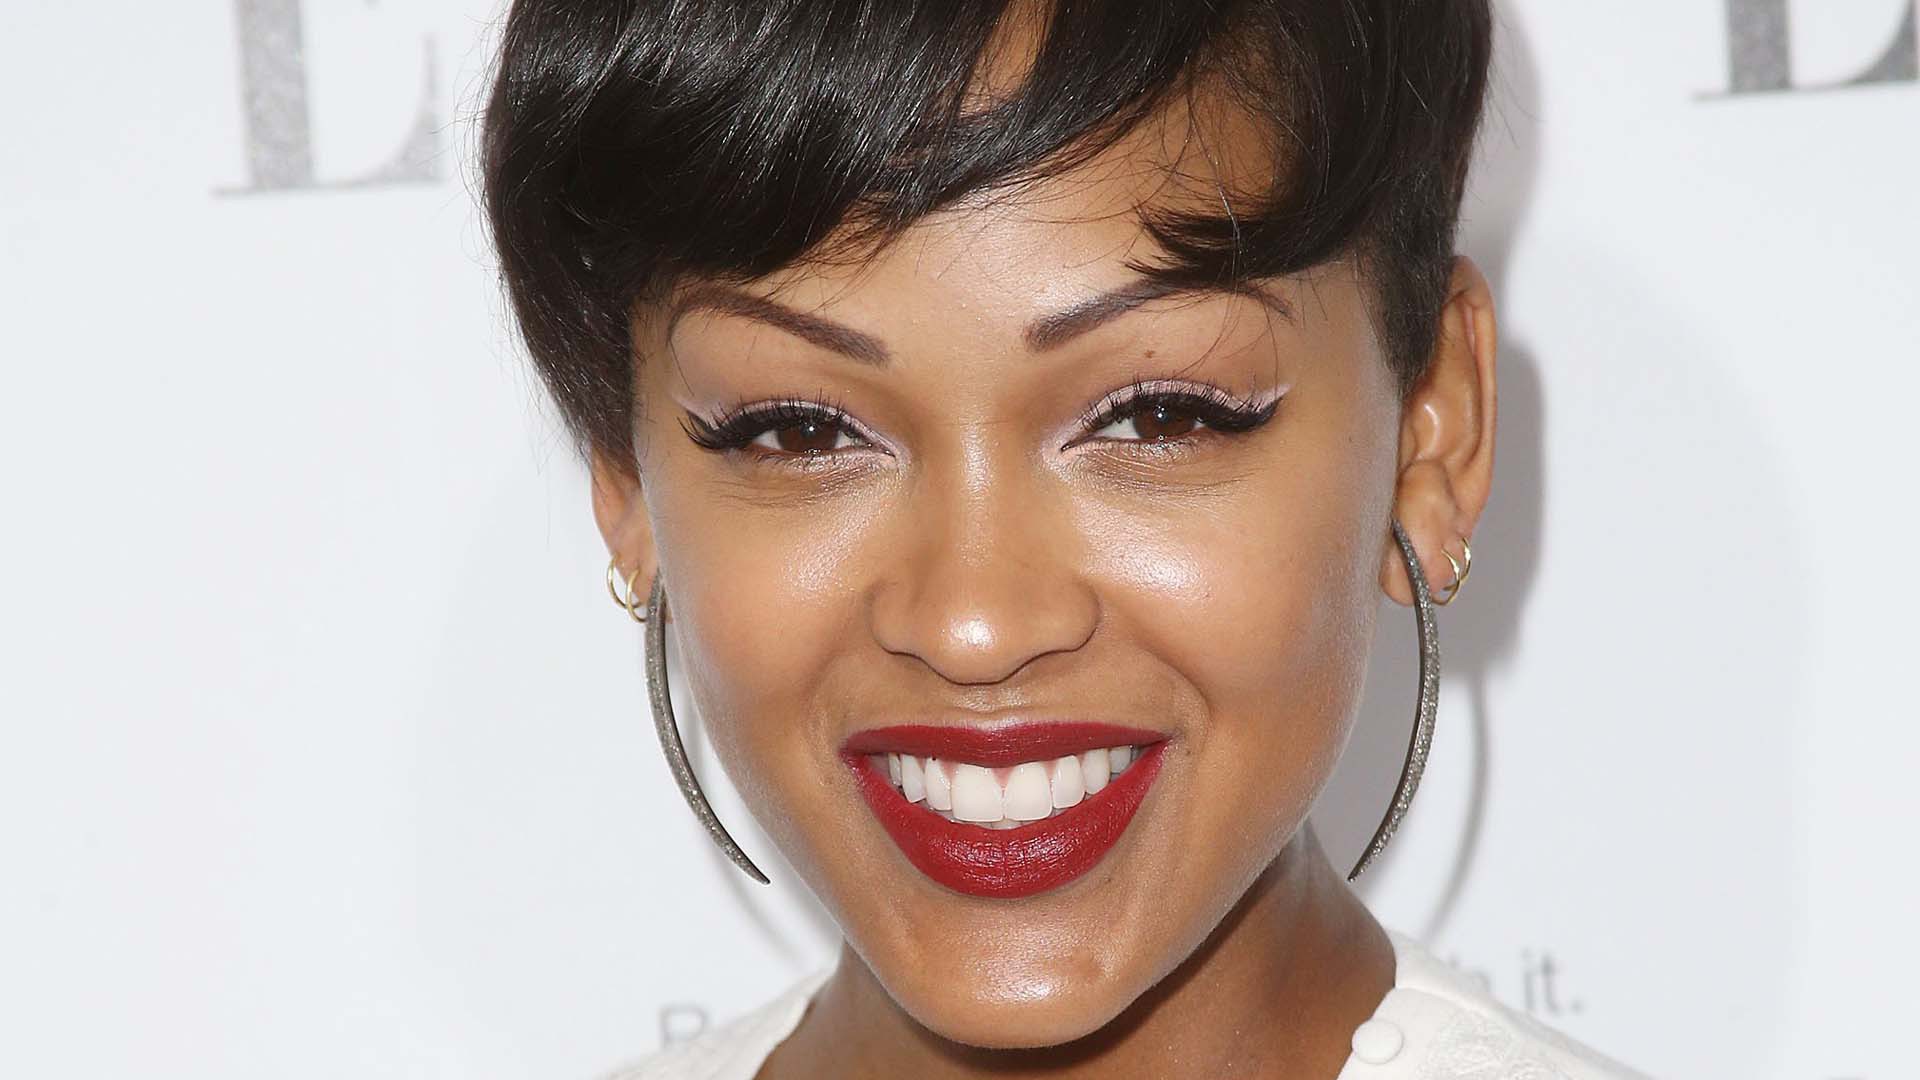 Meagan Good Wallpaper Image Photos Pictures Background